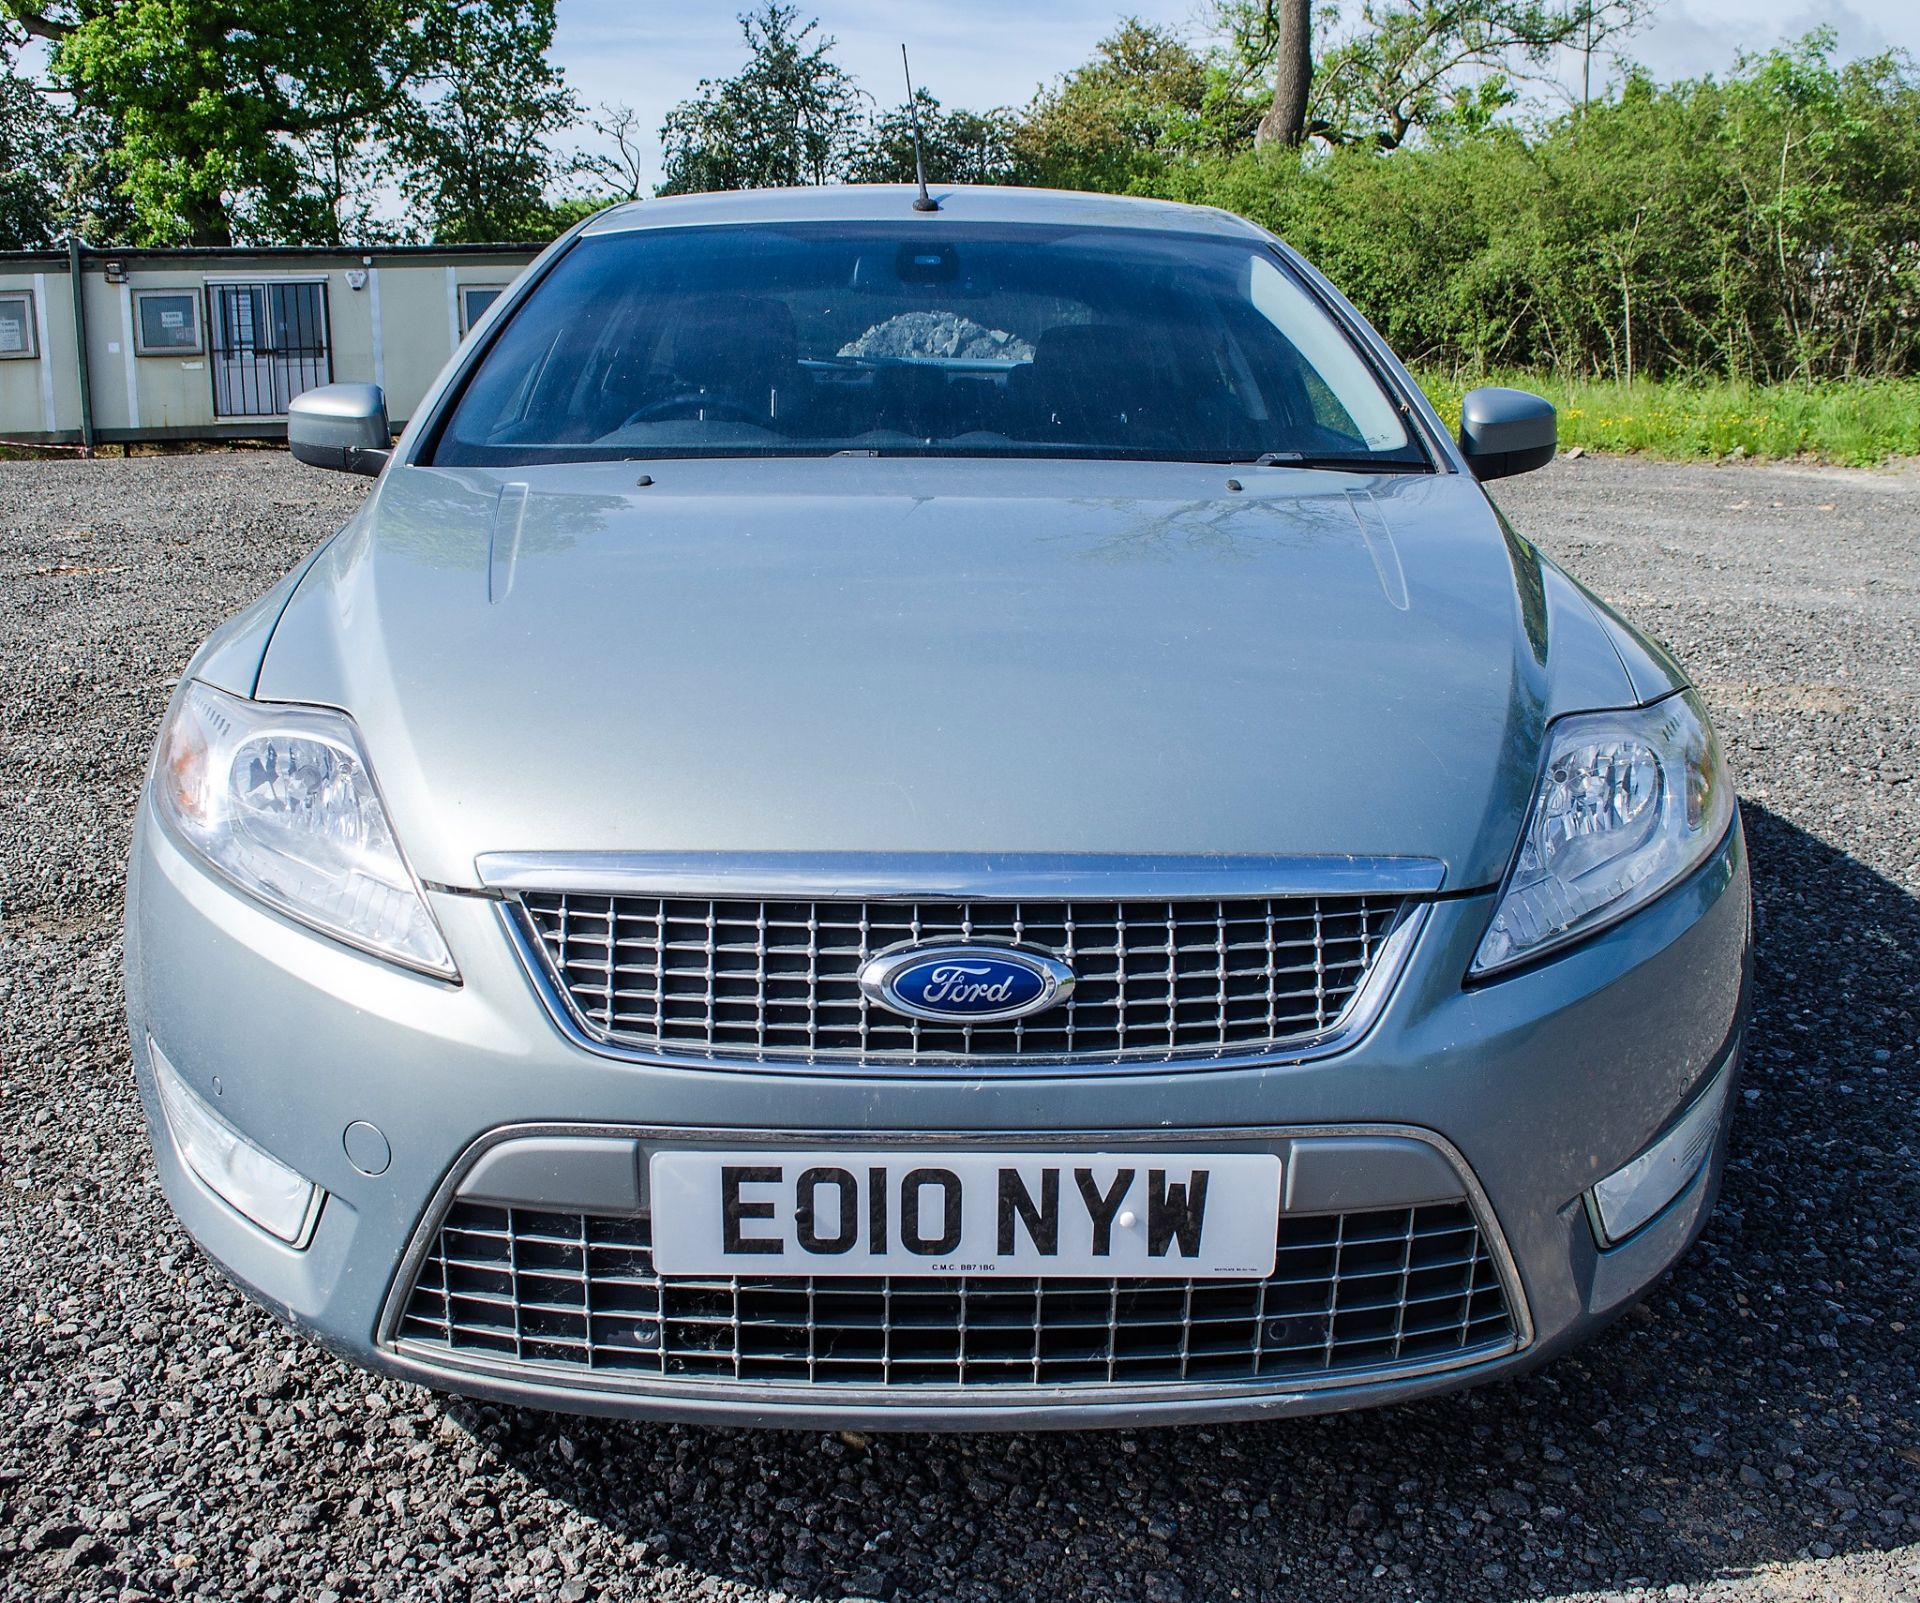 Ford Mondeo 2.0 TDCi Titanium 5 door saloon car Registration Number: EO10 NYW Date of - Image 5 of 29